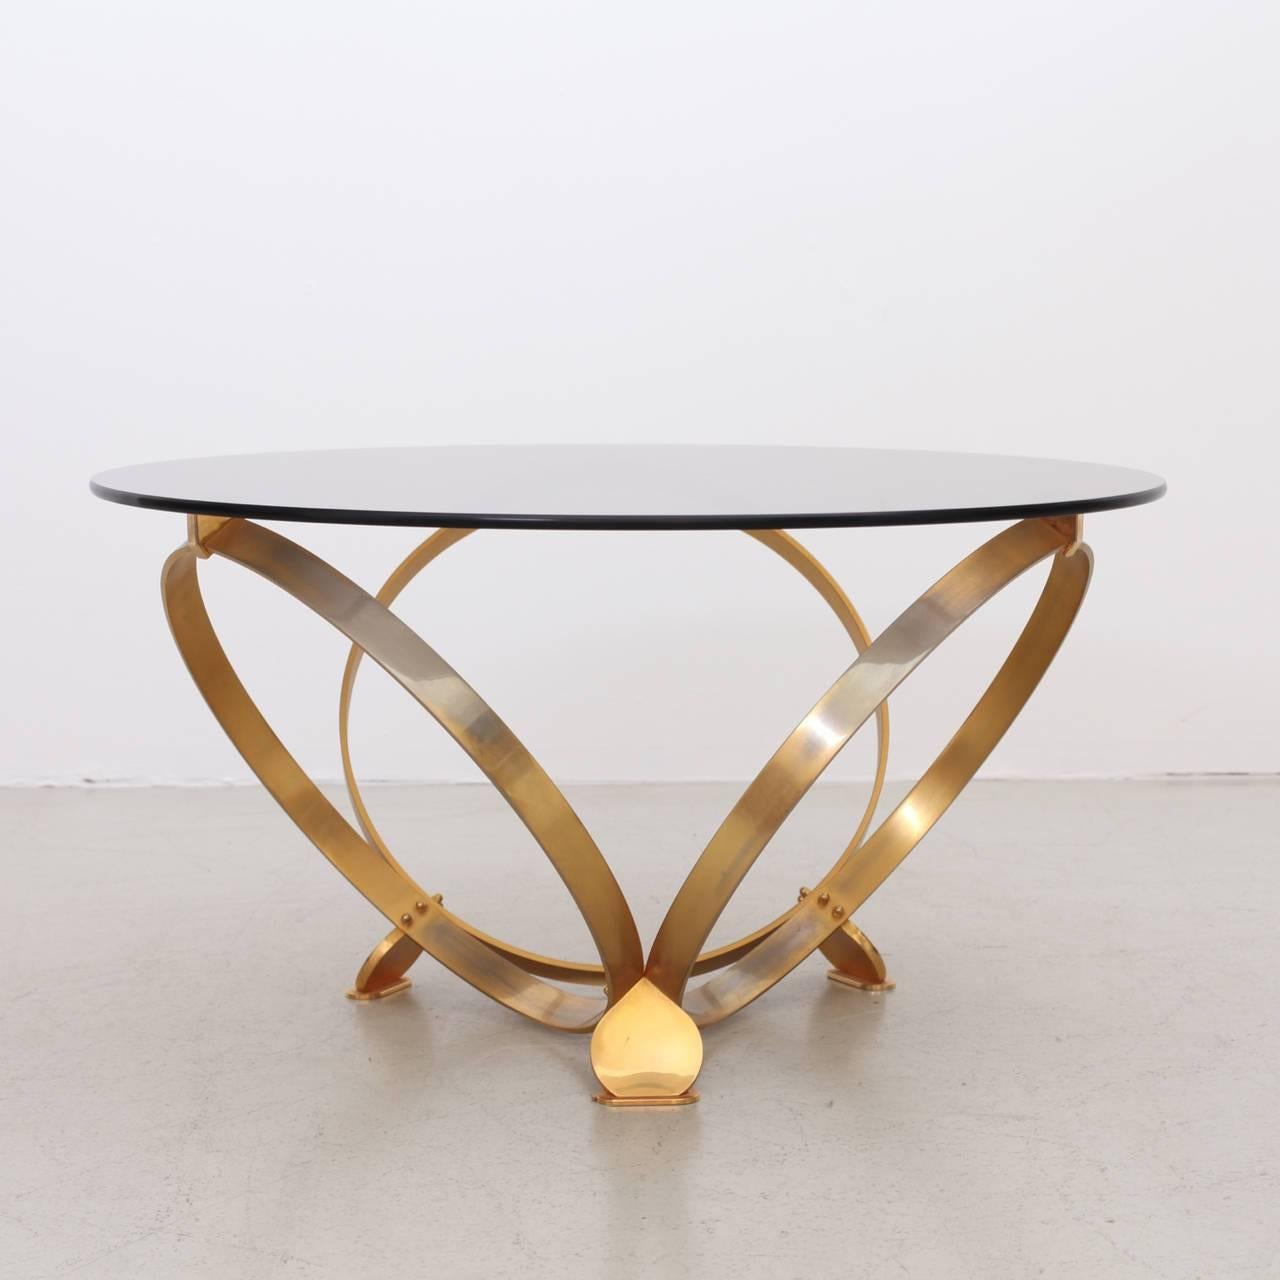 Wonderful coffee table with three solid geometric rings in brass with a floating glass top. Excellent condition.

